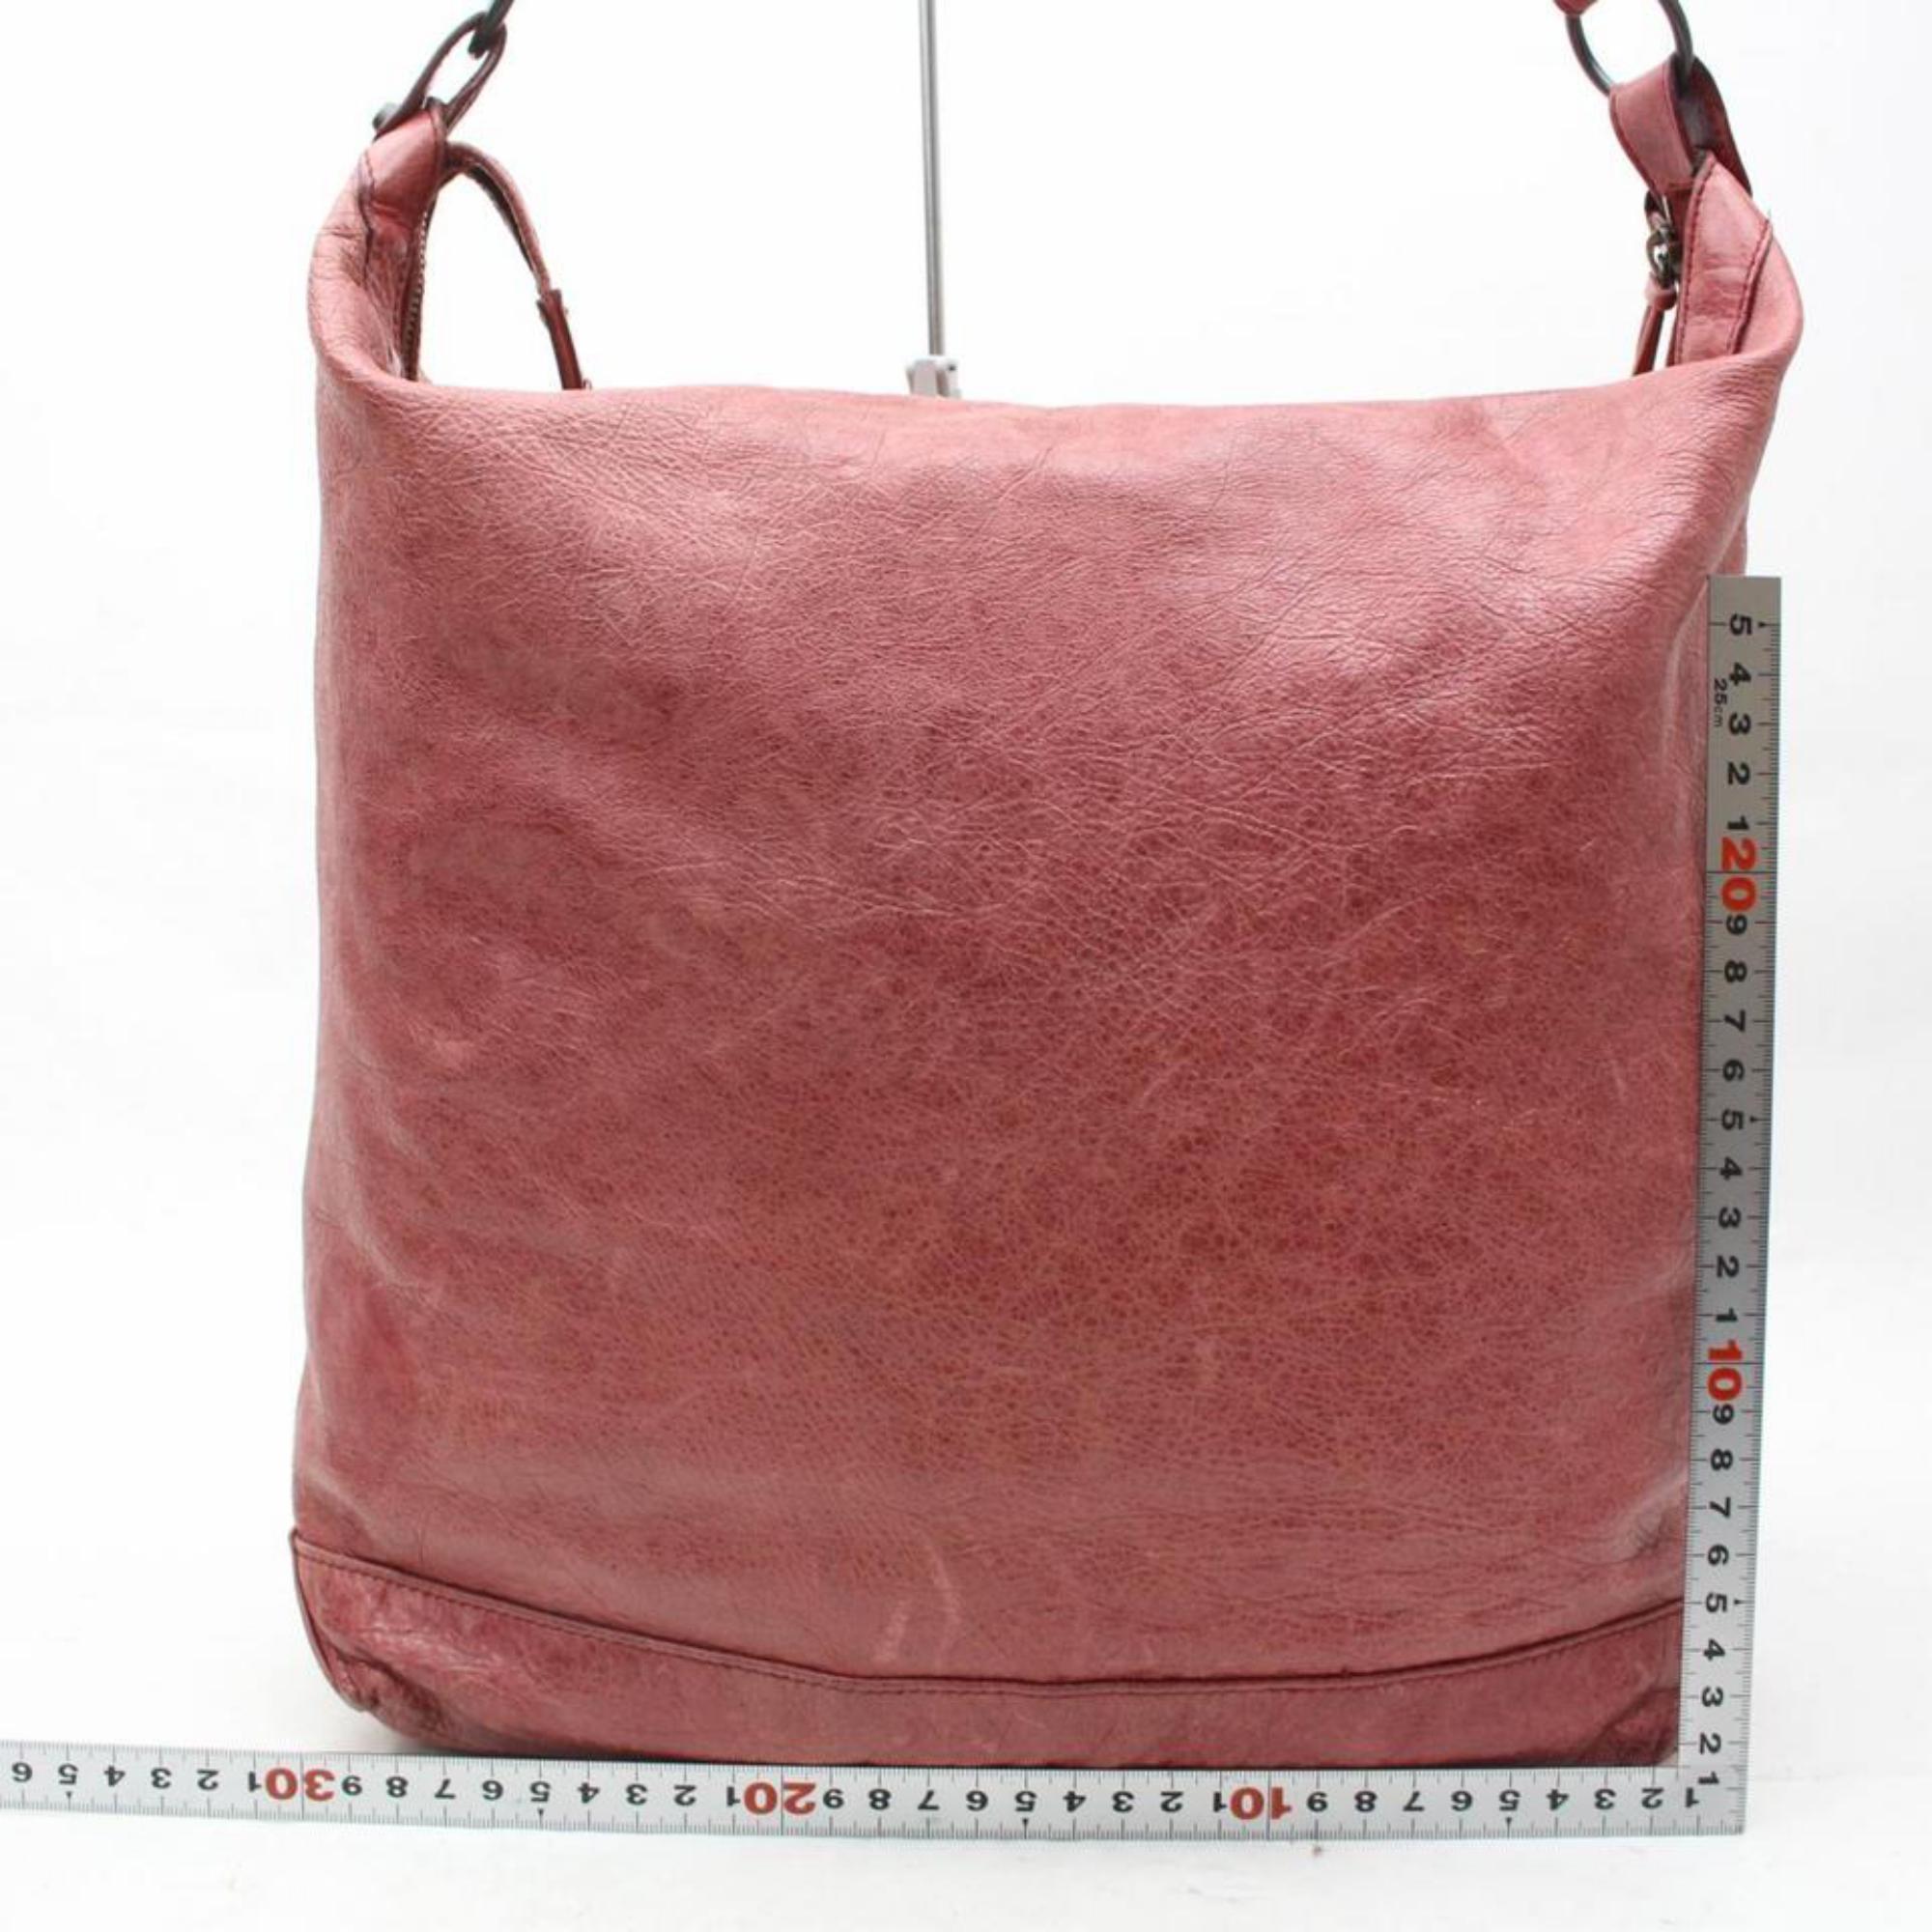 Balenciaga The Day Hobo 865766 Light Red Leather Shoulder Bag For Sale 1